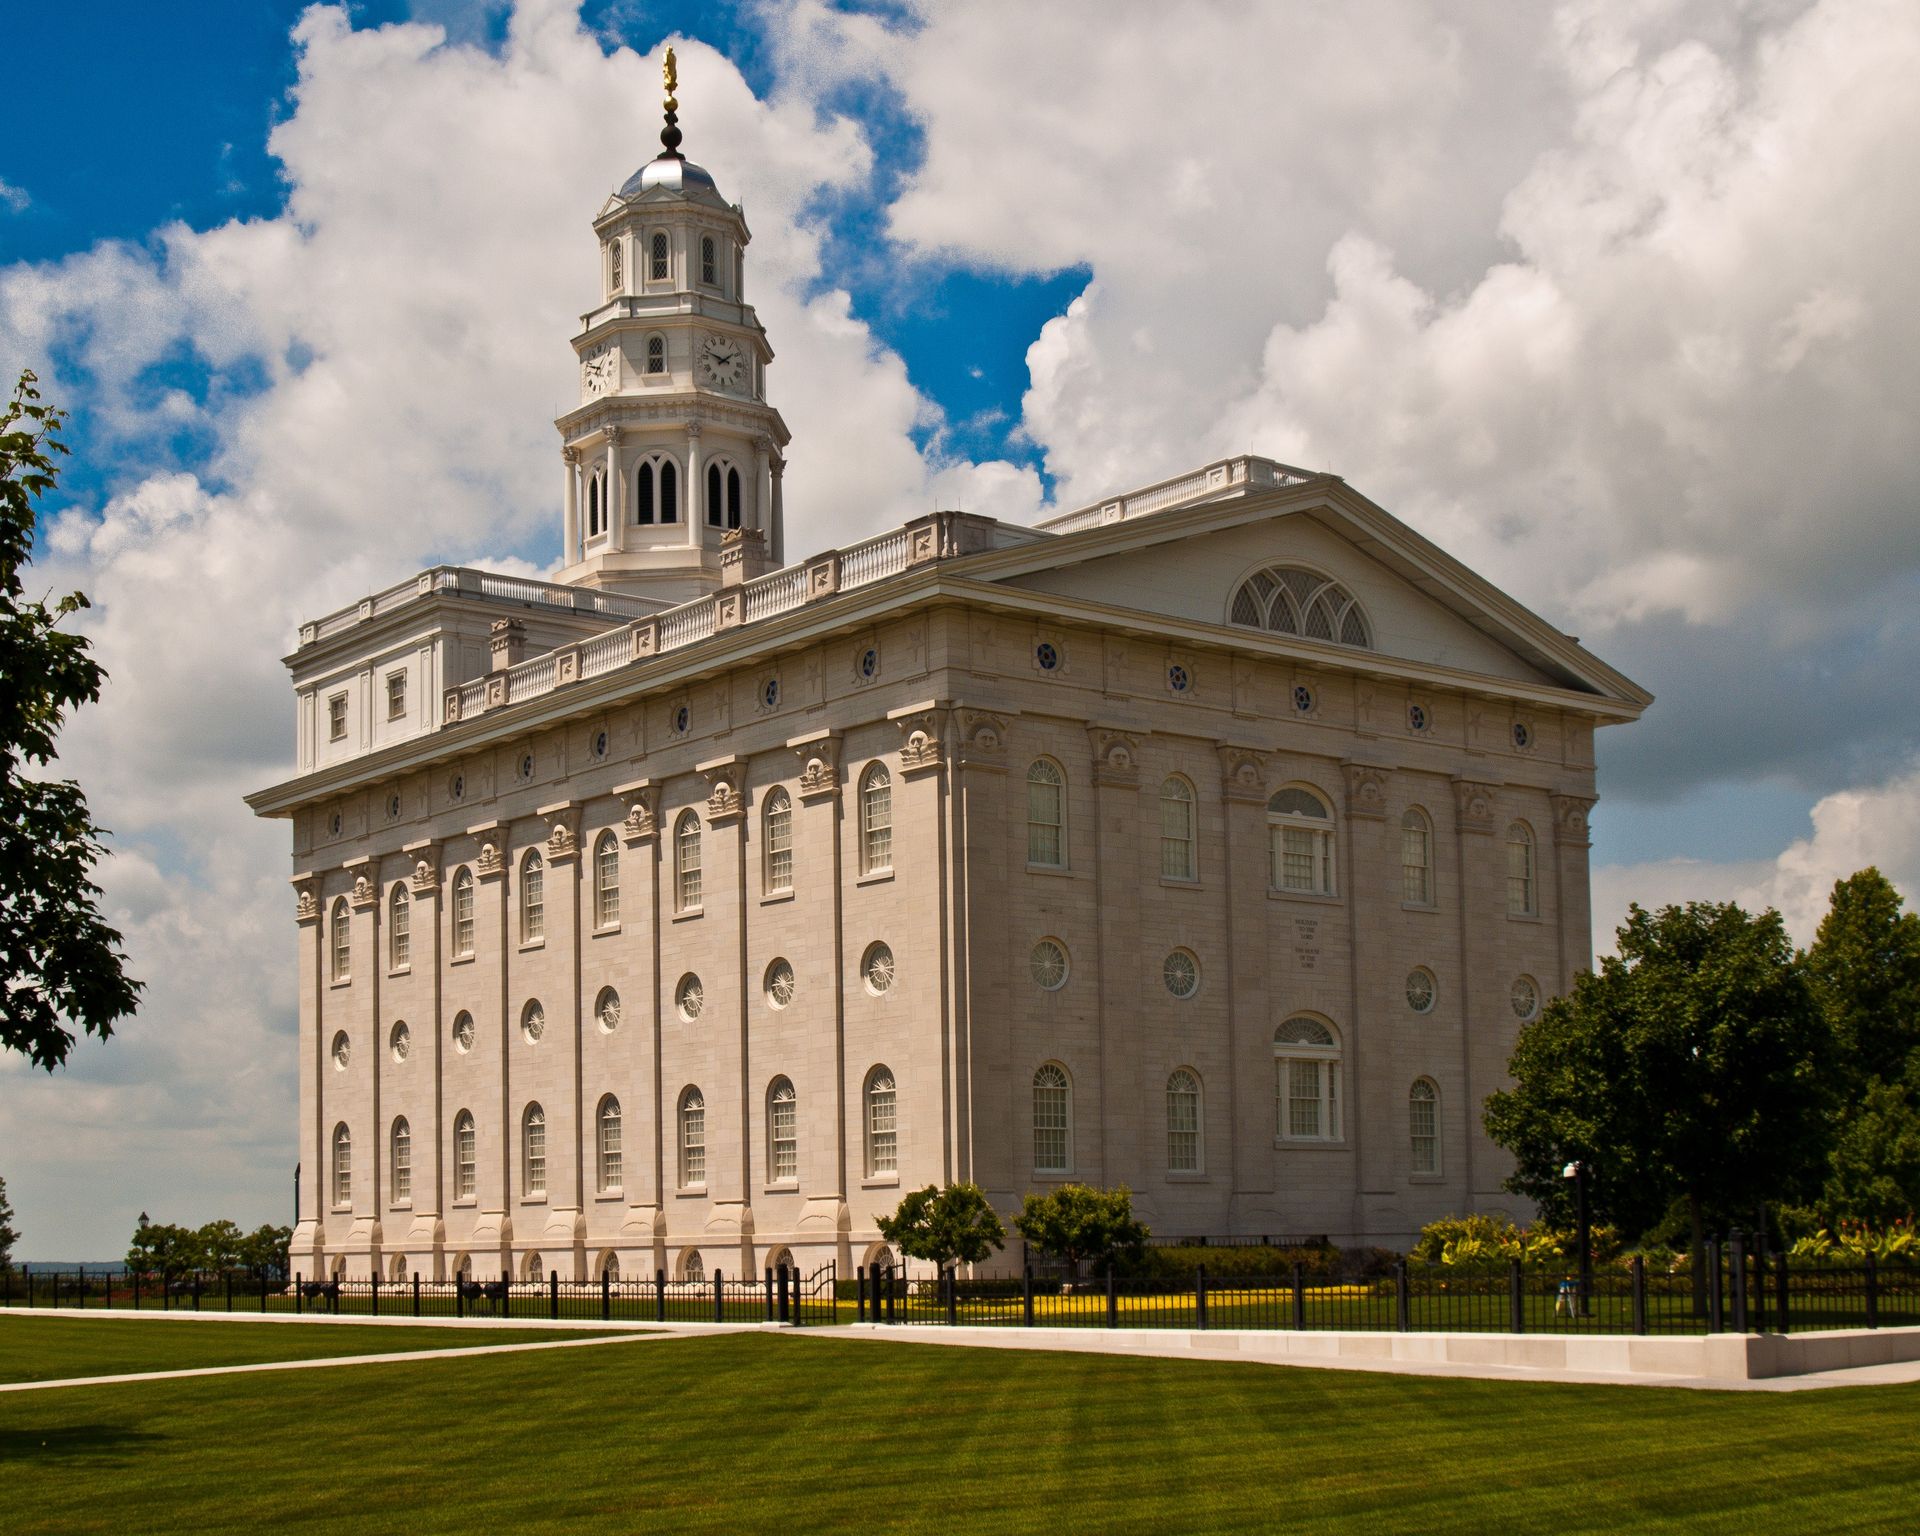 The Nauvoo Illinois Temple back view, including scenery.